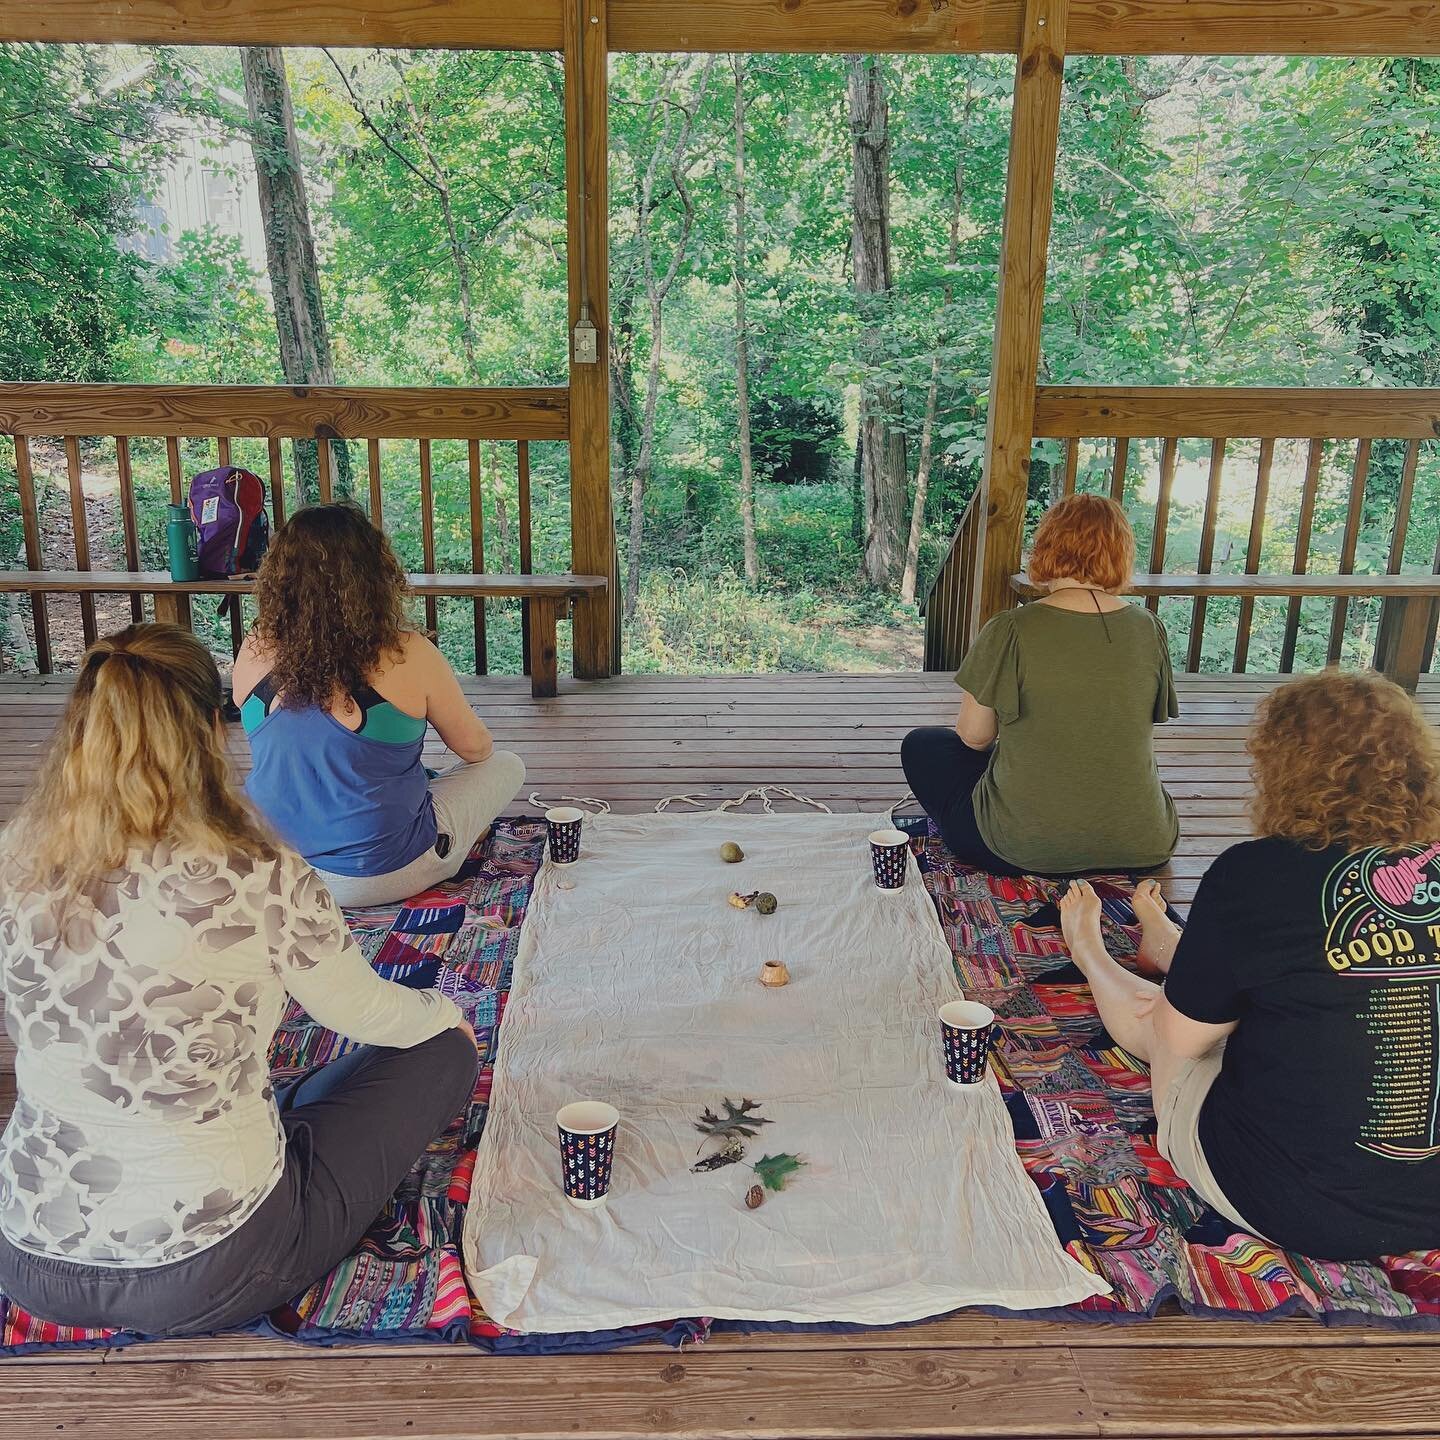 Watching strangers make deep connections with themselves, Nature and one another is one of my favorite parts about guiding forest bathing experiences with @wyldlightwalks. 

Within a few minutes most people begin to notice their bodies relaxing, thei